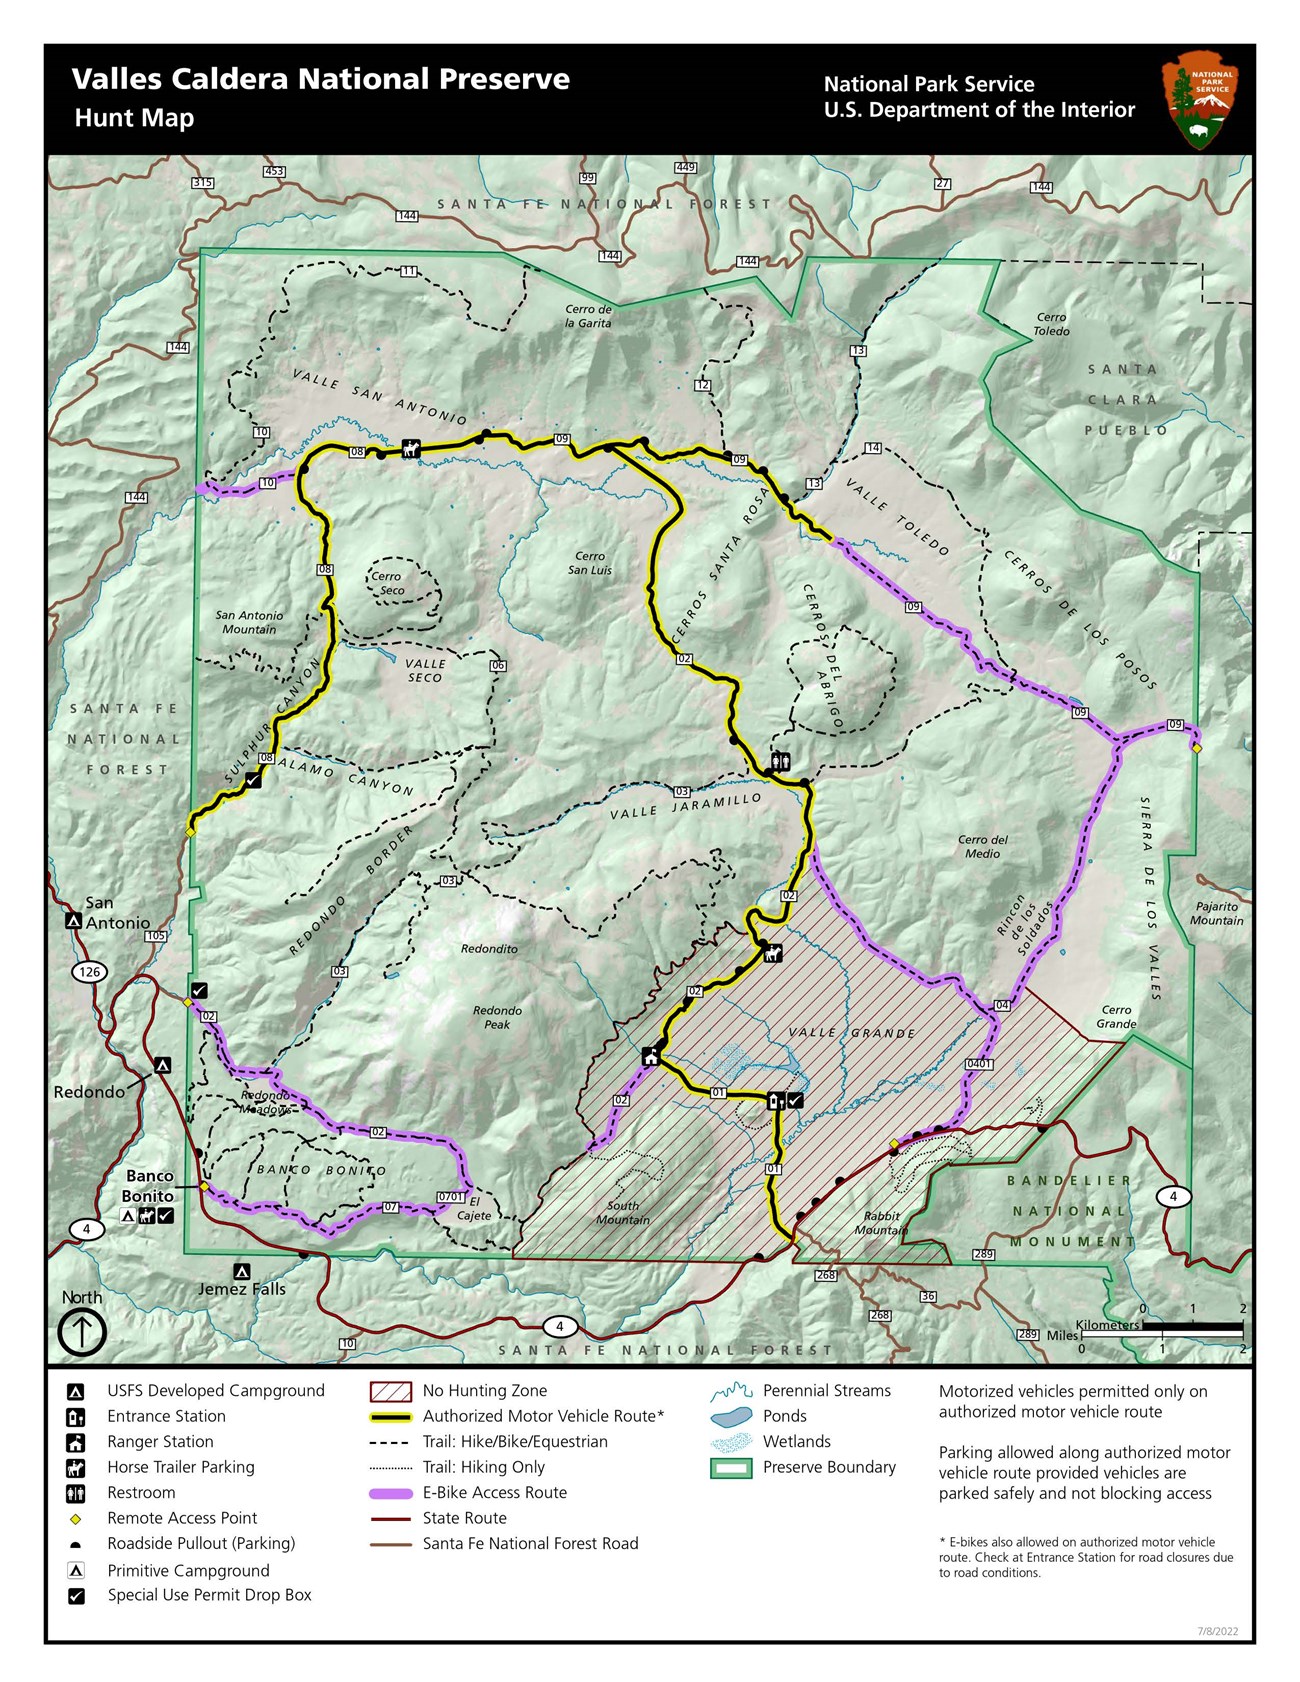 A color-coded map showing hunting zones and no-hunting zones at Valles Caldera National Preserve. All park roads, Valle Grande, Redondo Peak, Rabbit Mountain, and South Mountain are off-limits for hunting.